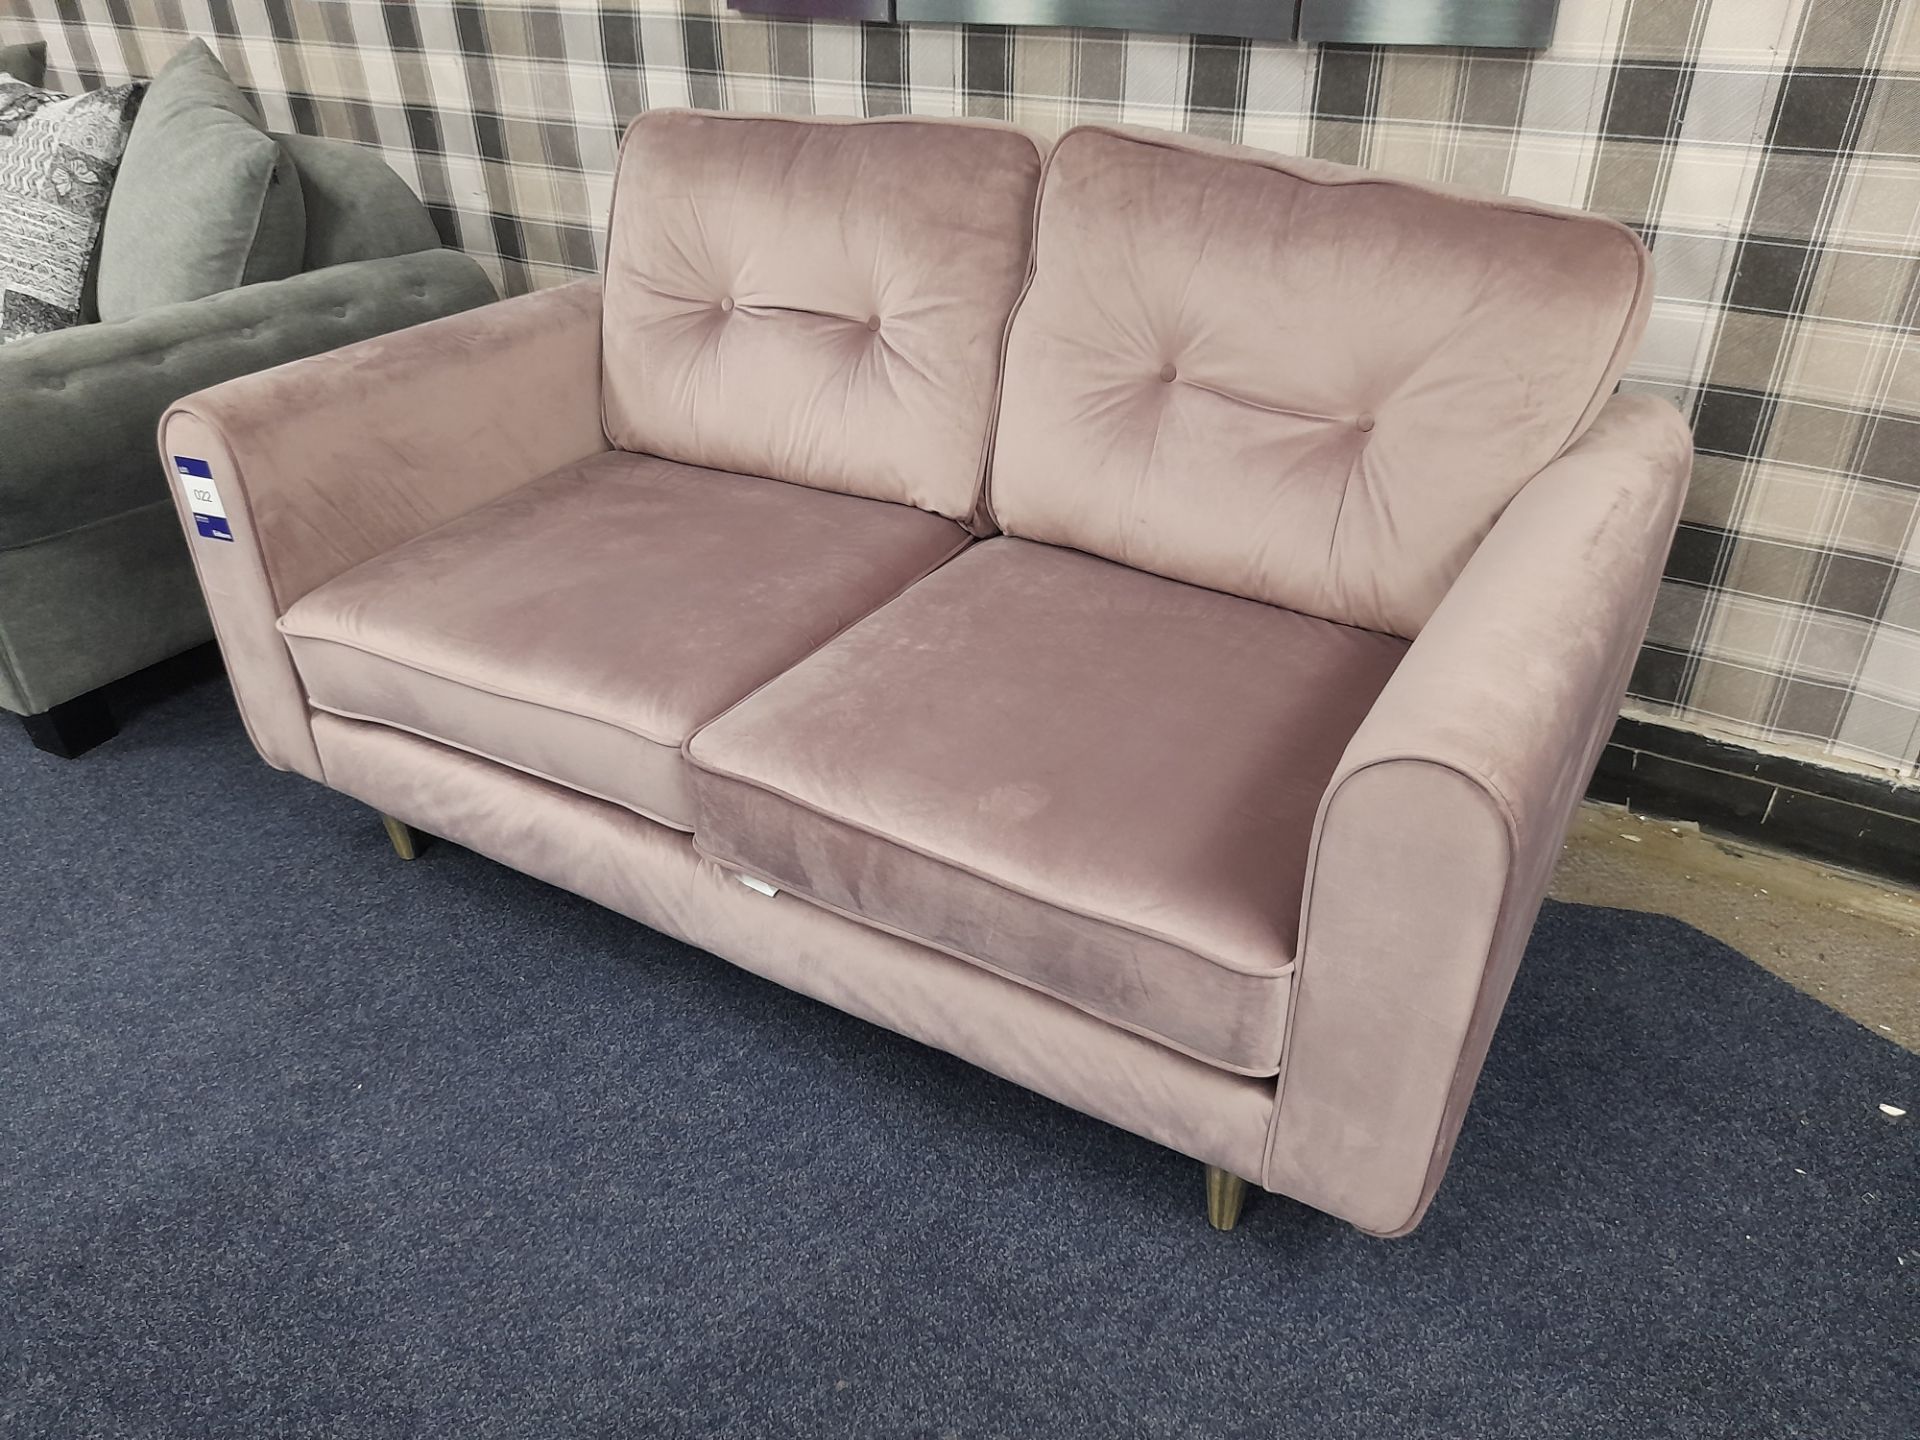 Pink fabric upholstered, 2 seater, standard cushioned back sofa (Return – delivery damage) - Image 2 of 5